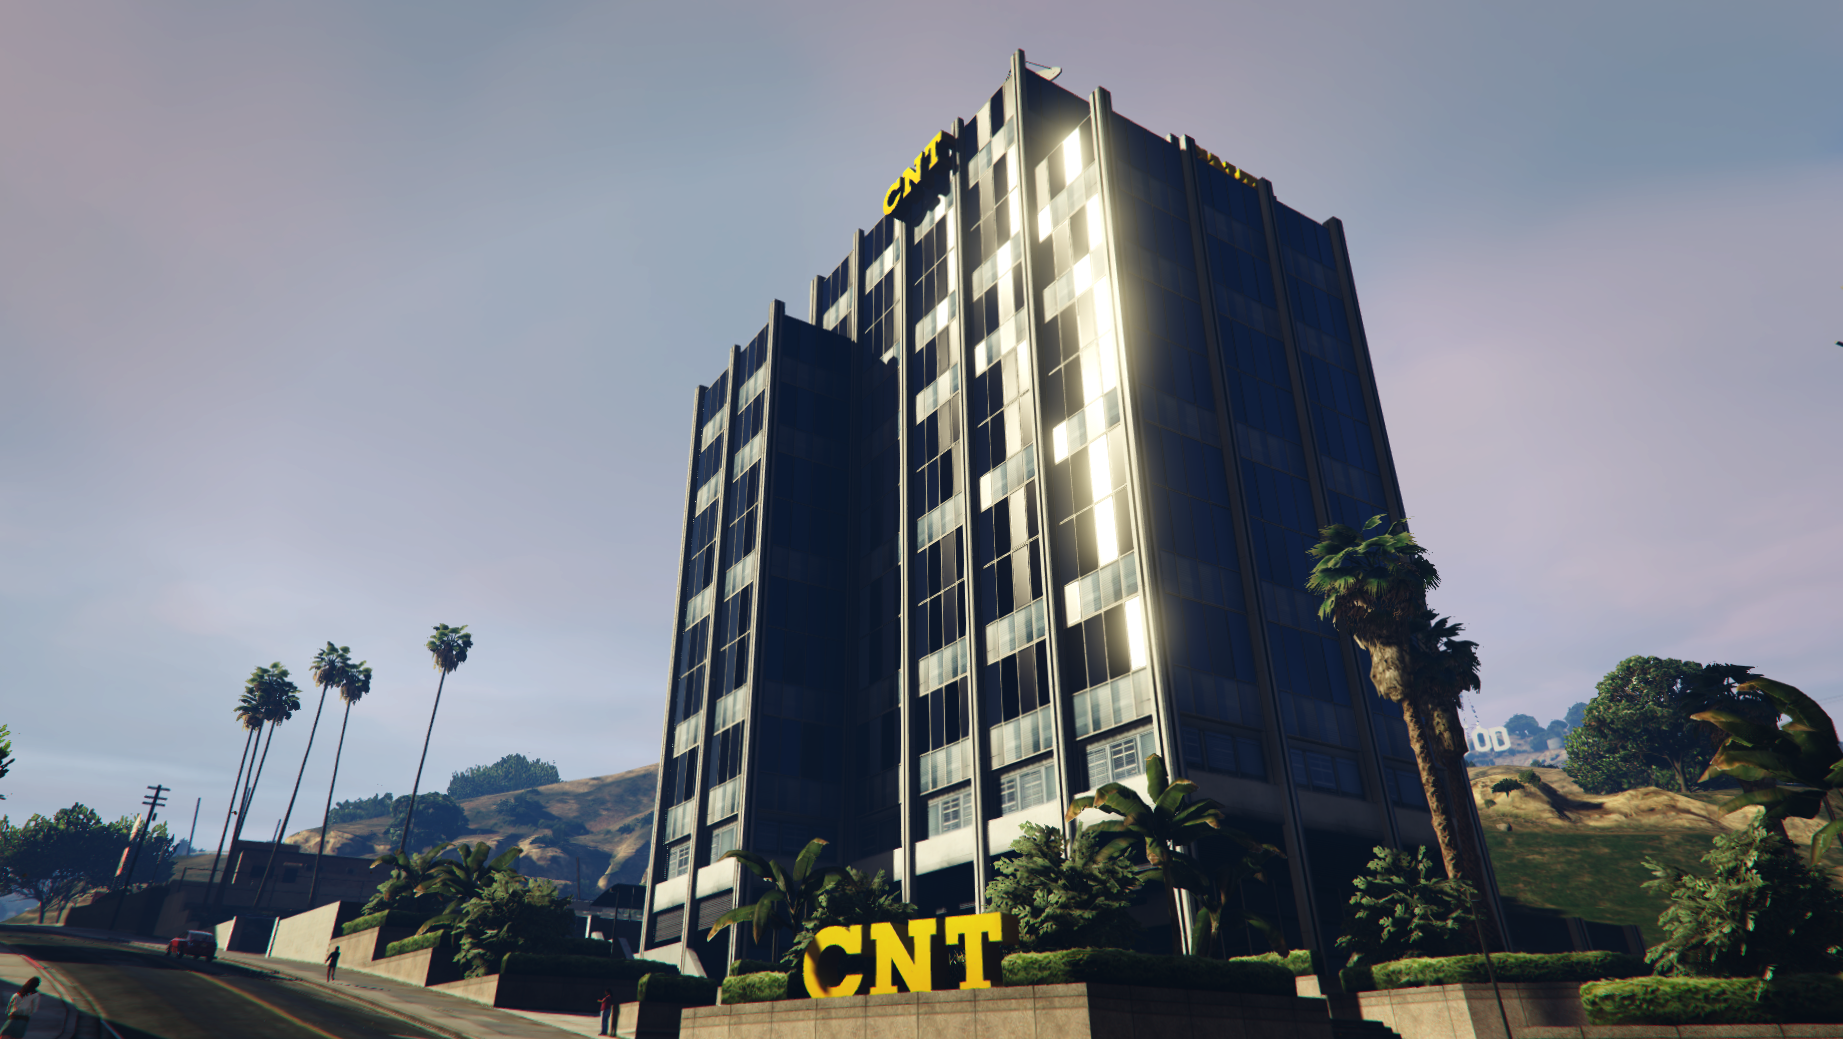 Real architecture gta 5 фото 89